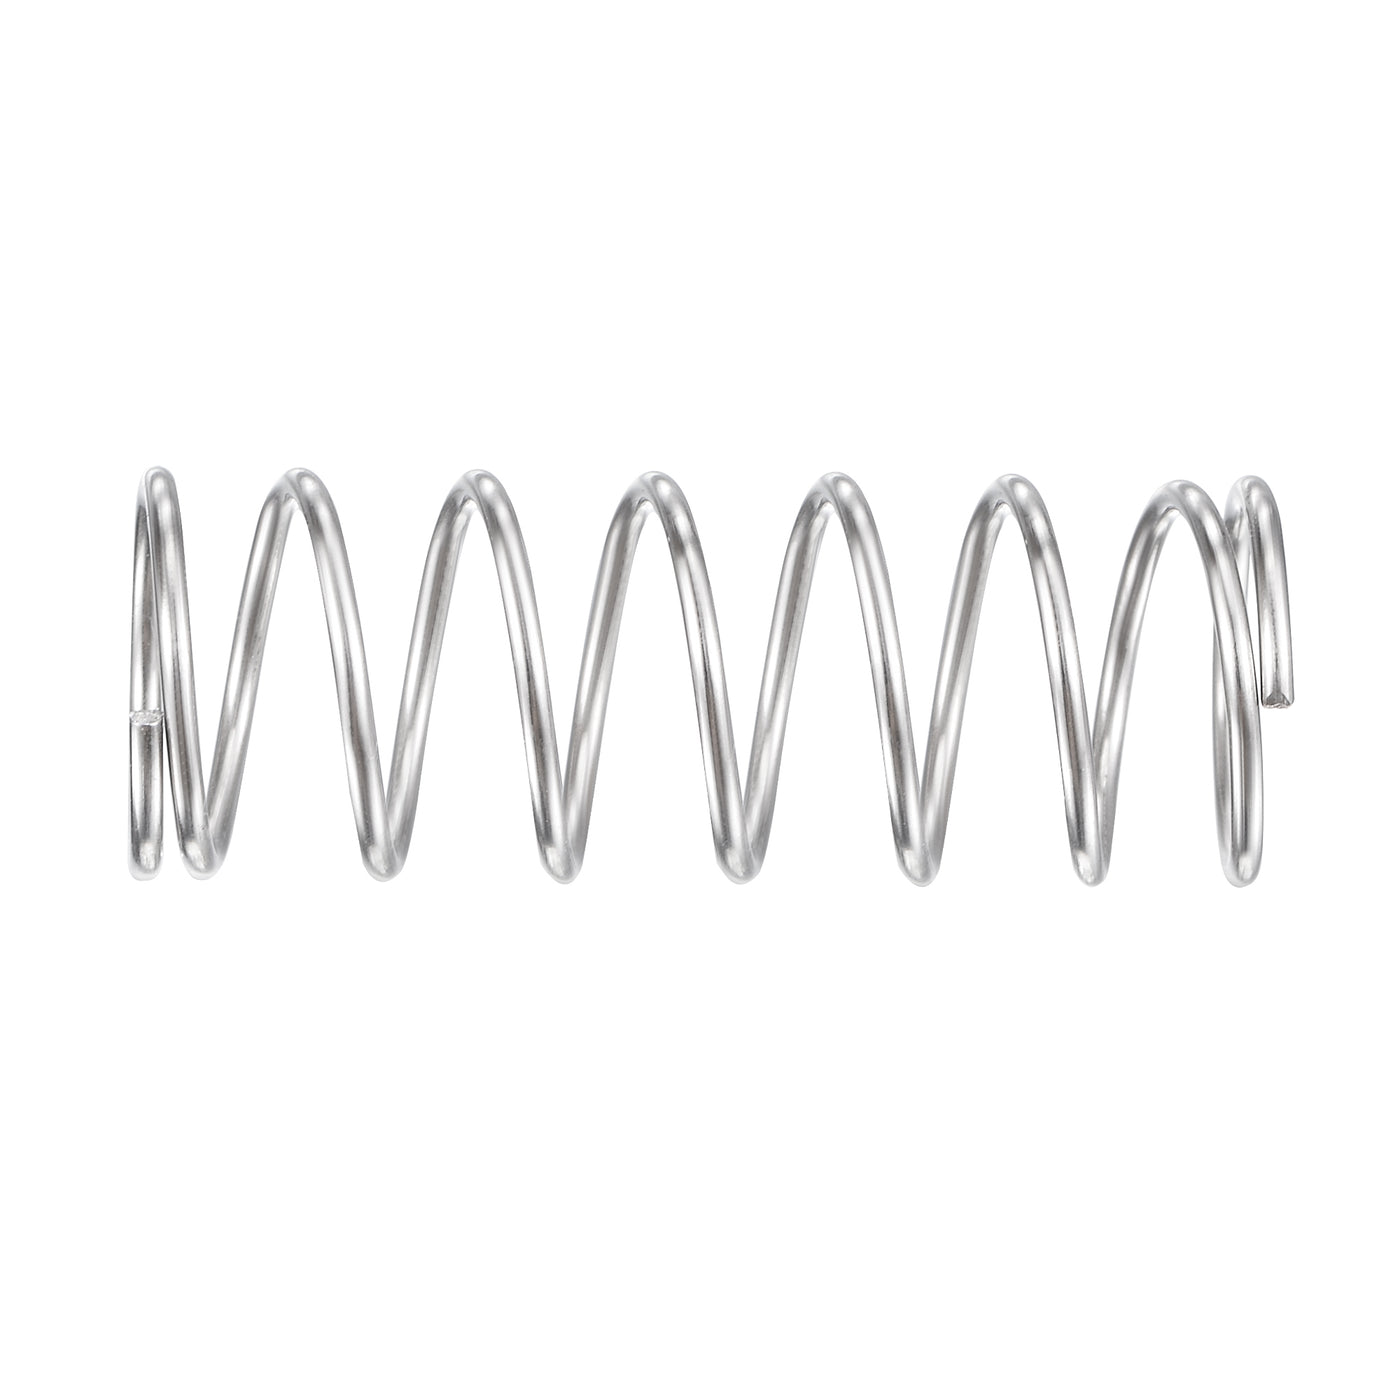 uxcell Uxcell 11mmx0.9mmx30mm 304 Stainless Steel Compression Spring 11N Load Capacity 10pcs